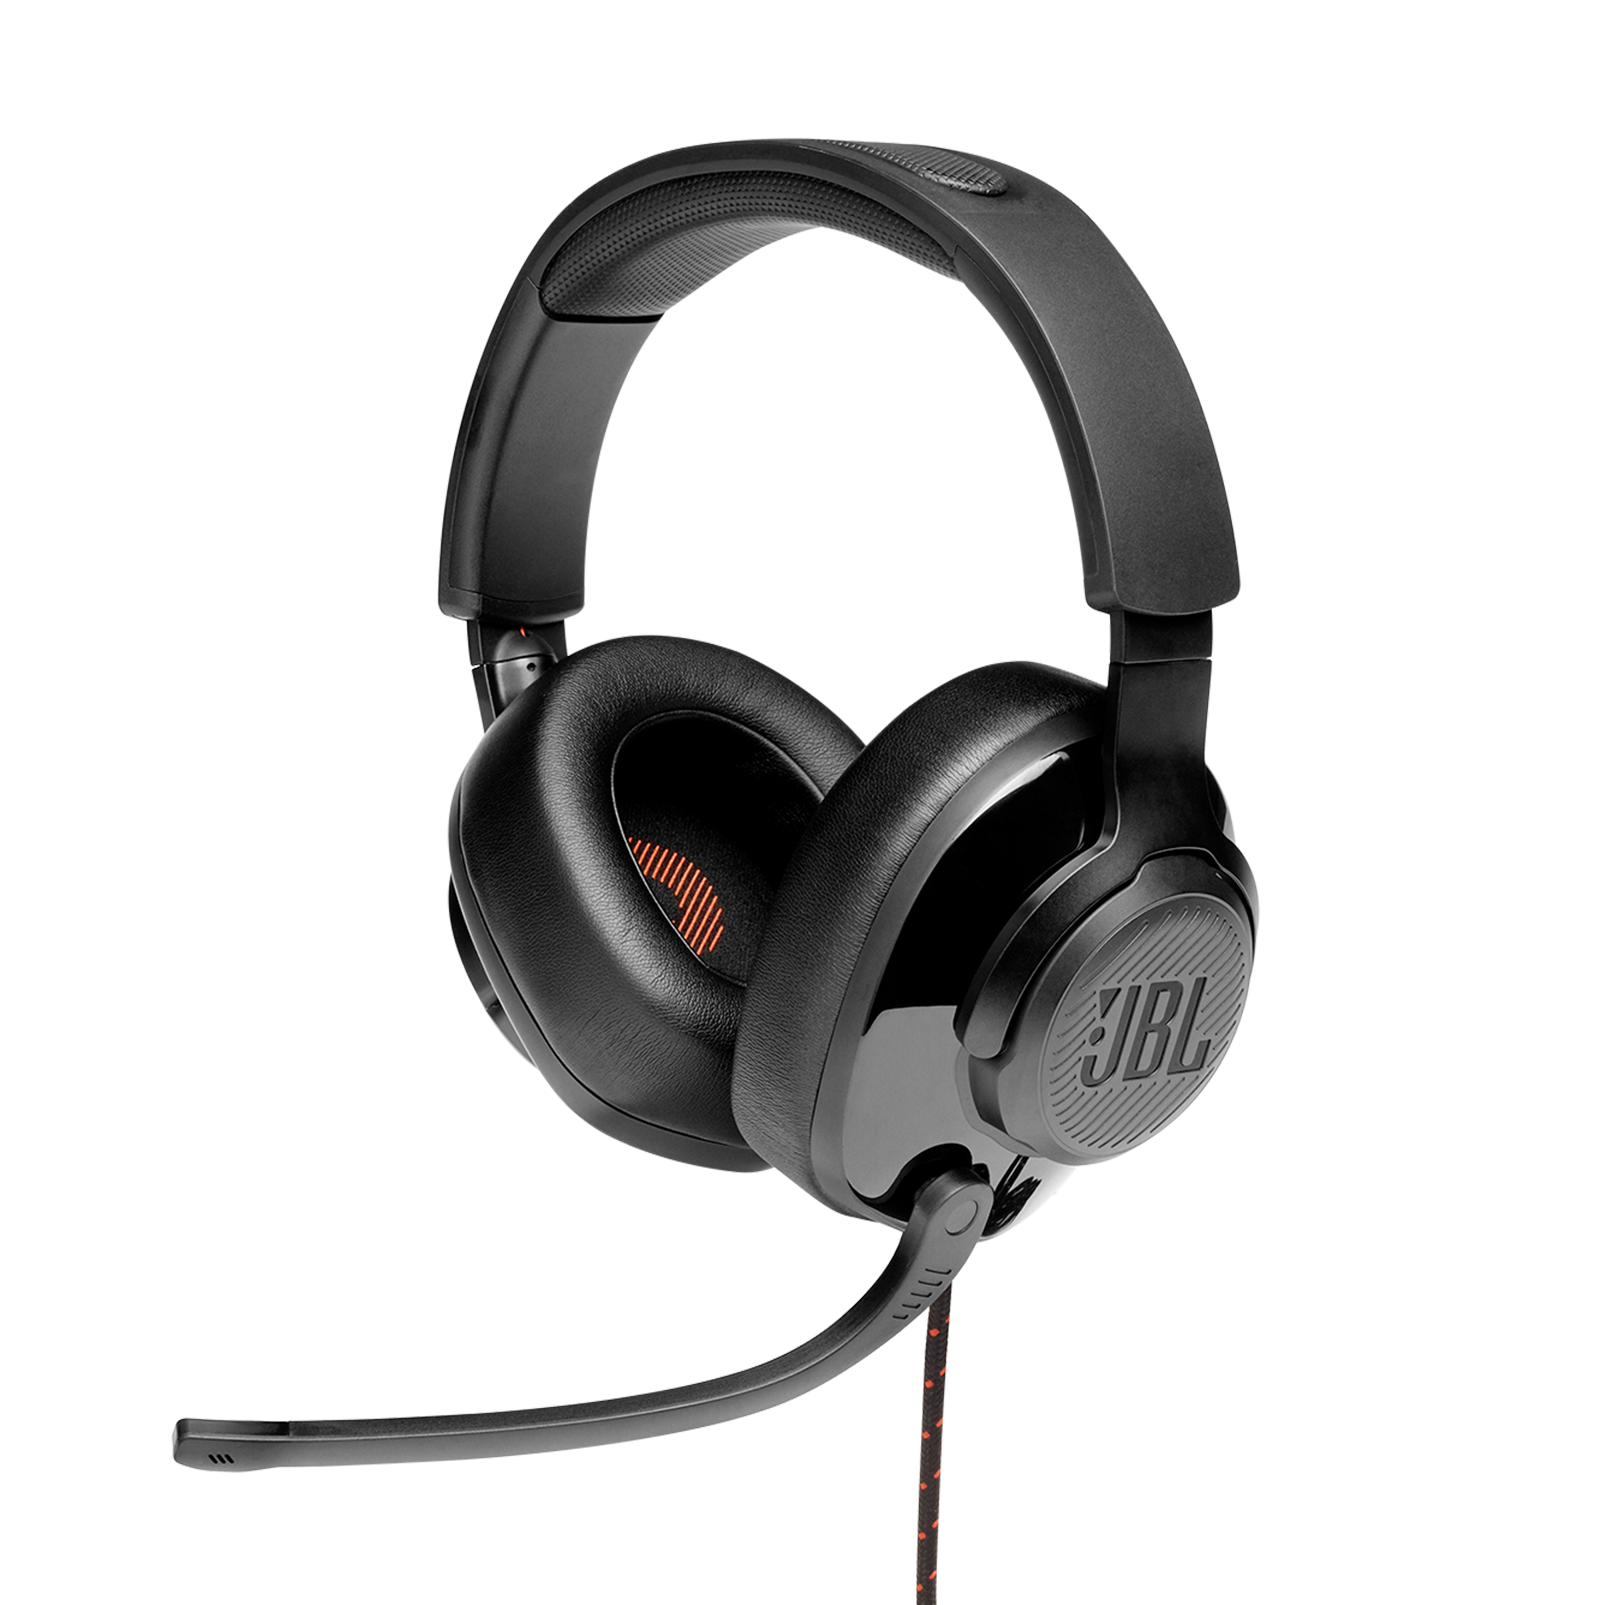 loudest headset for xbox one